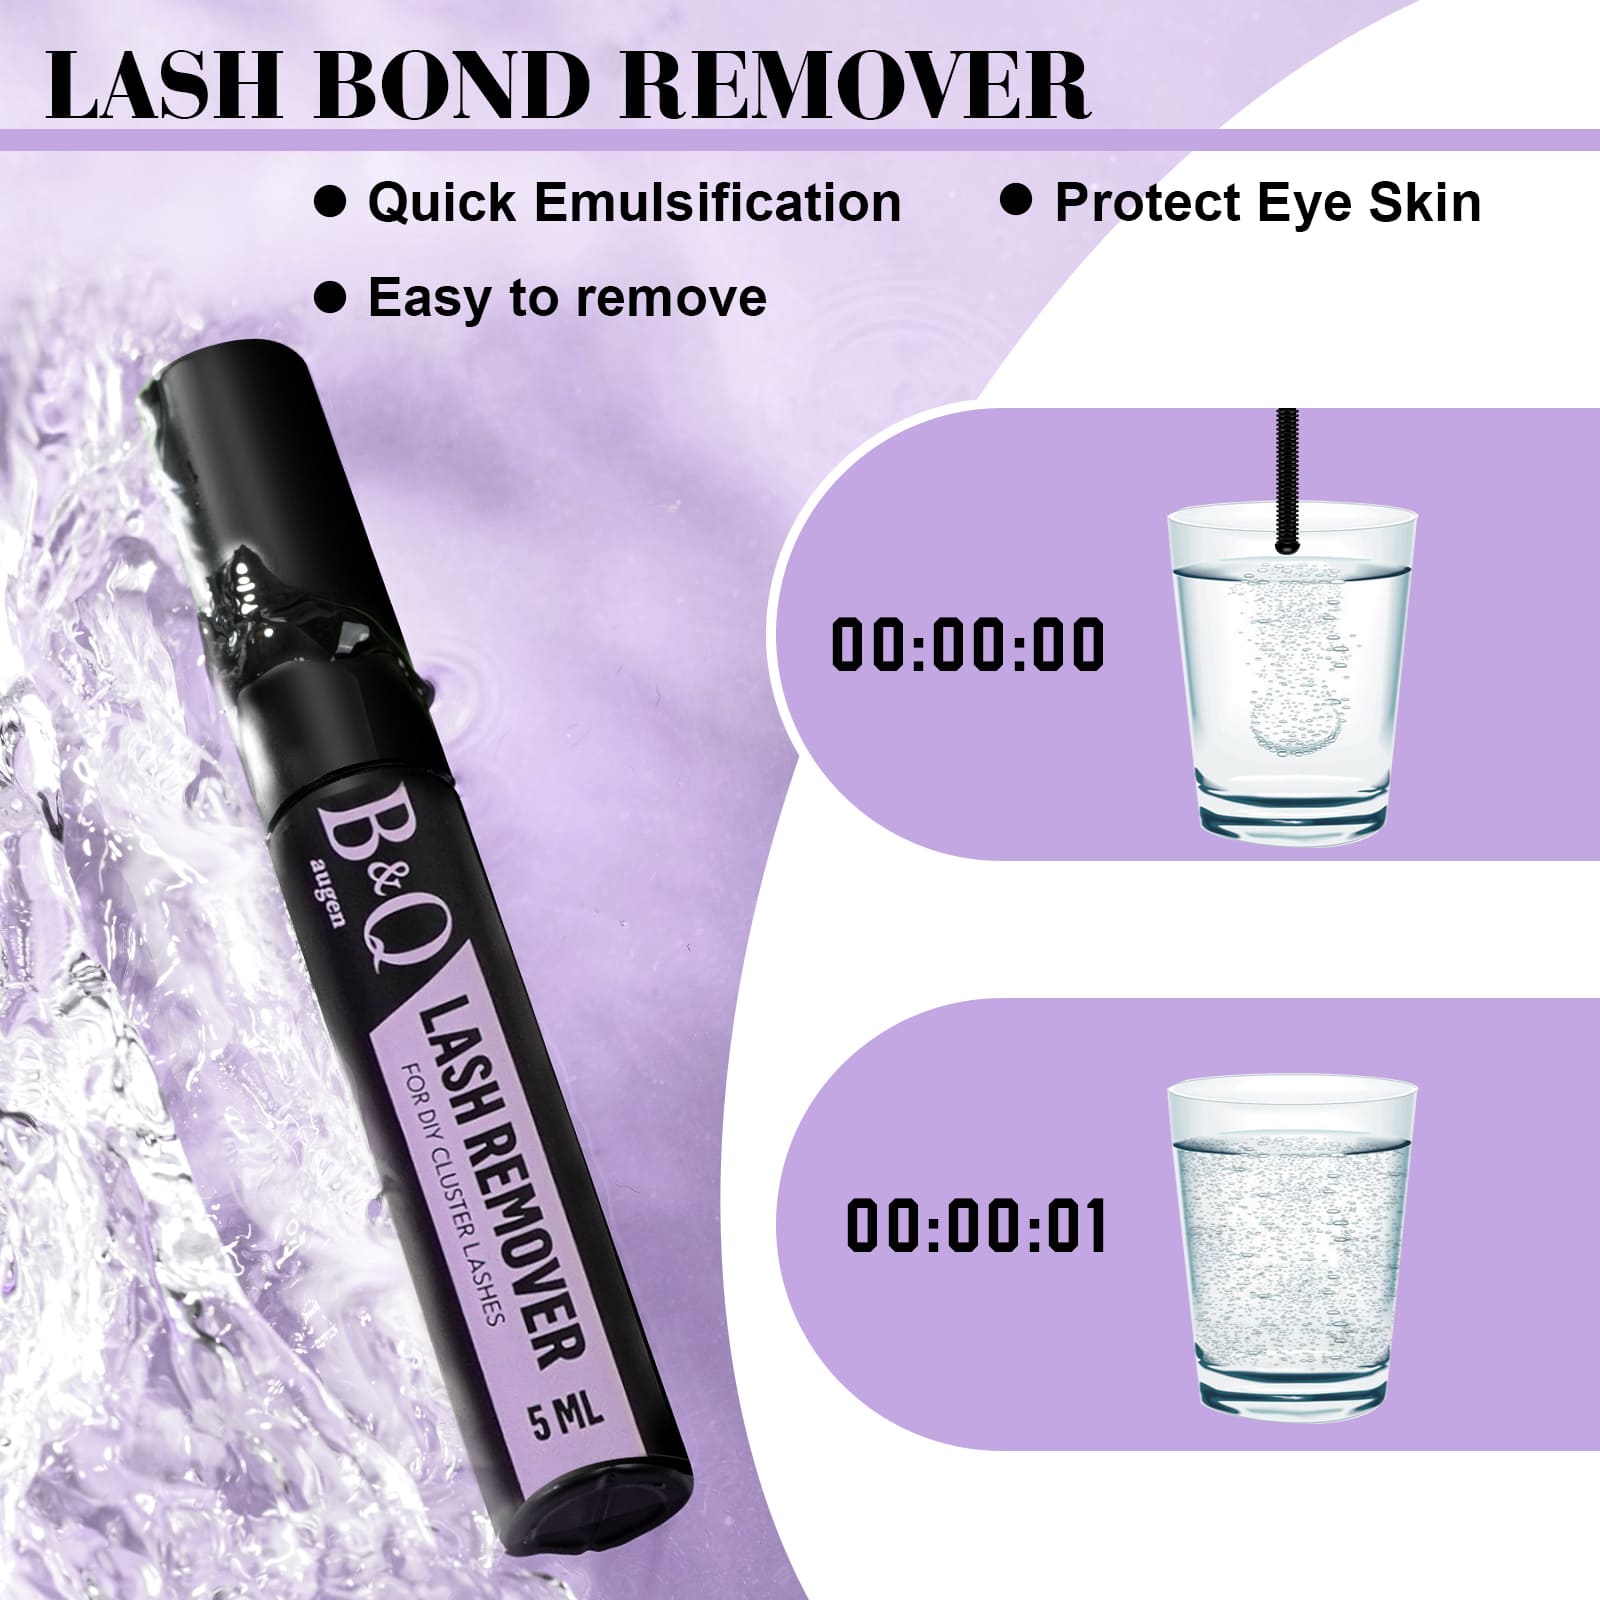 B&amp;Q lash remover easy to remove protect your own lashes